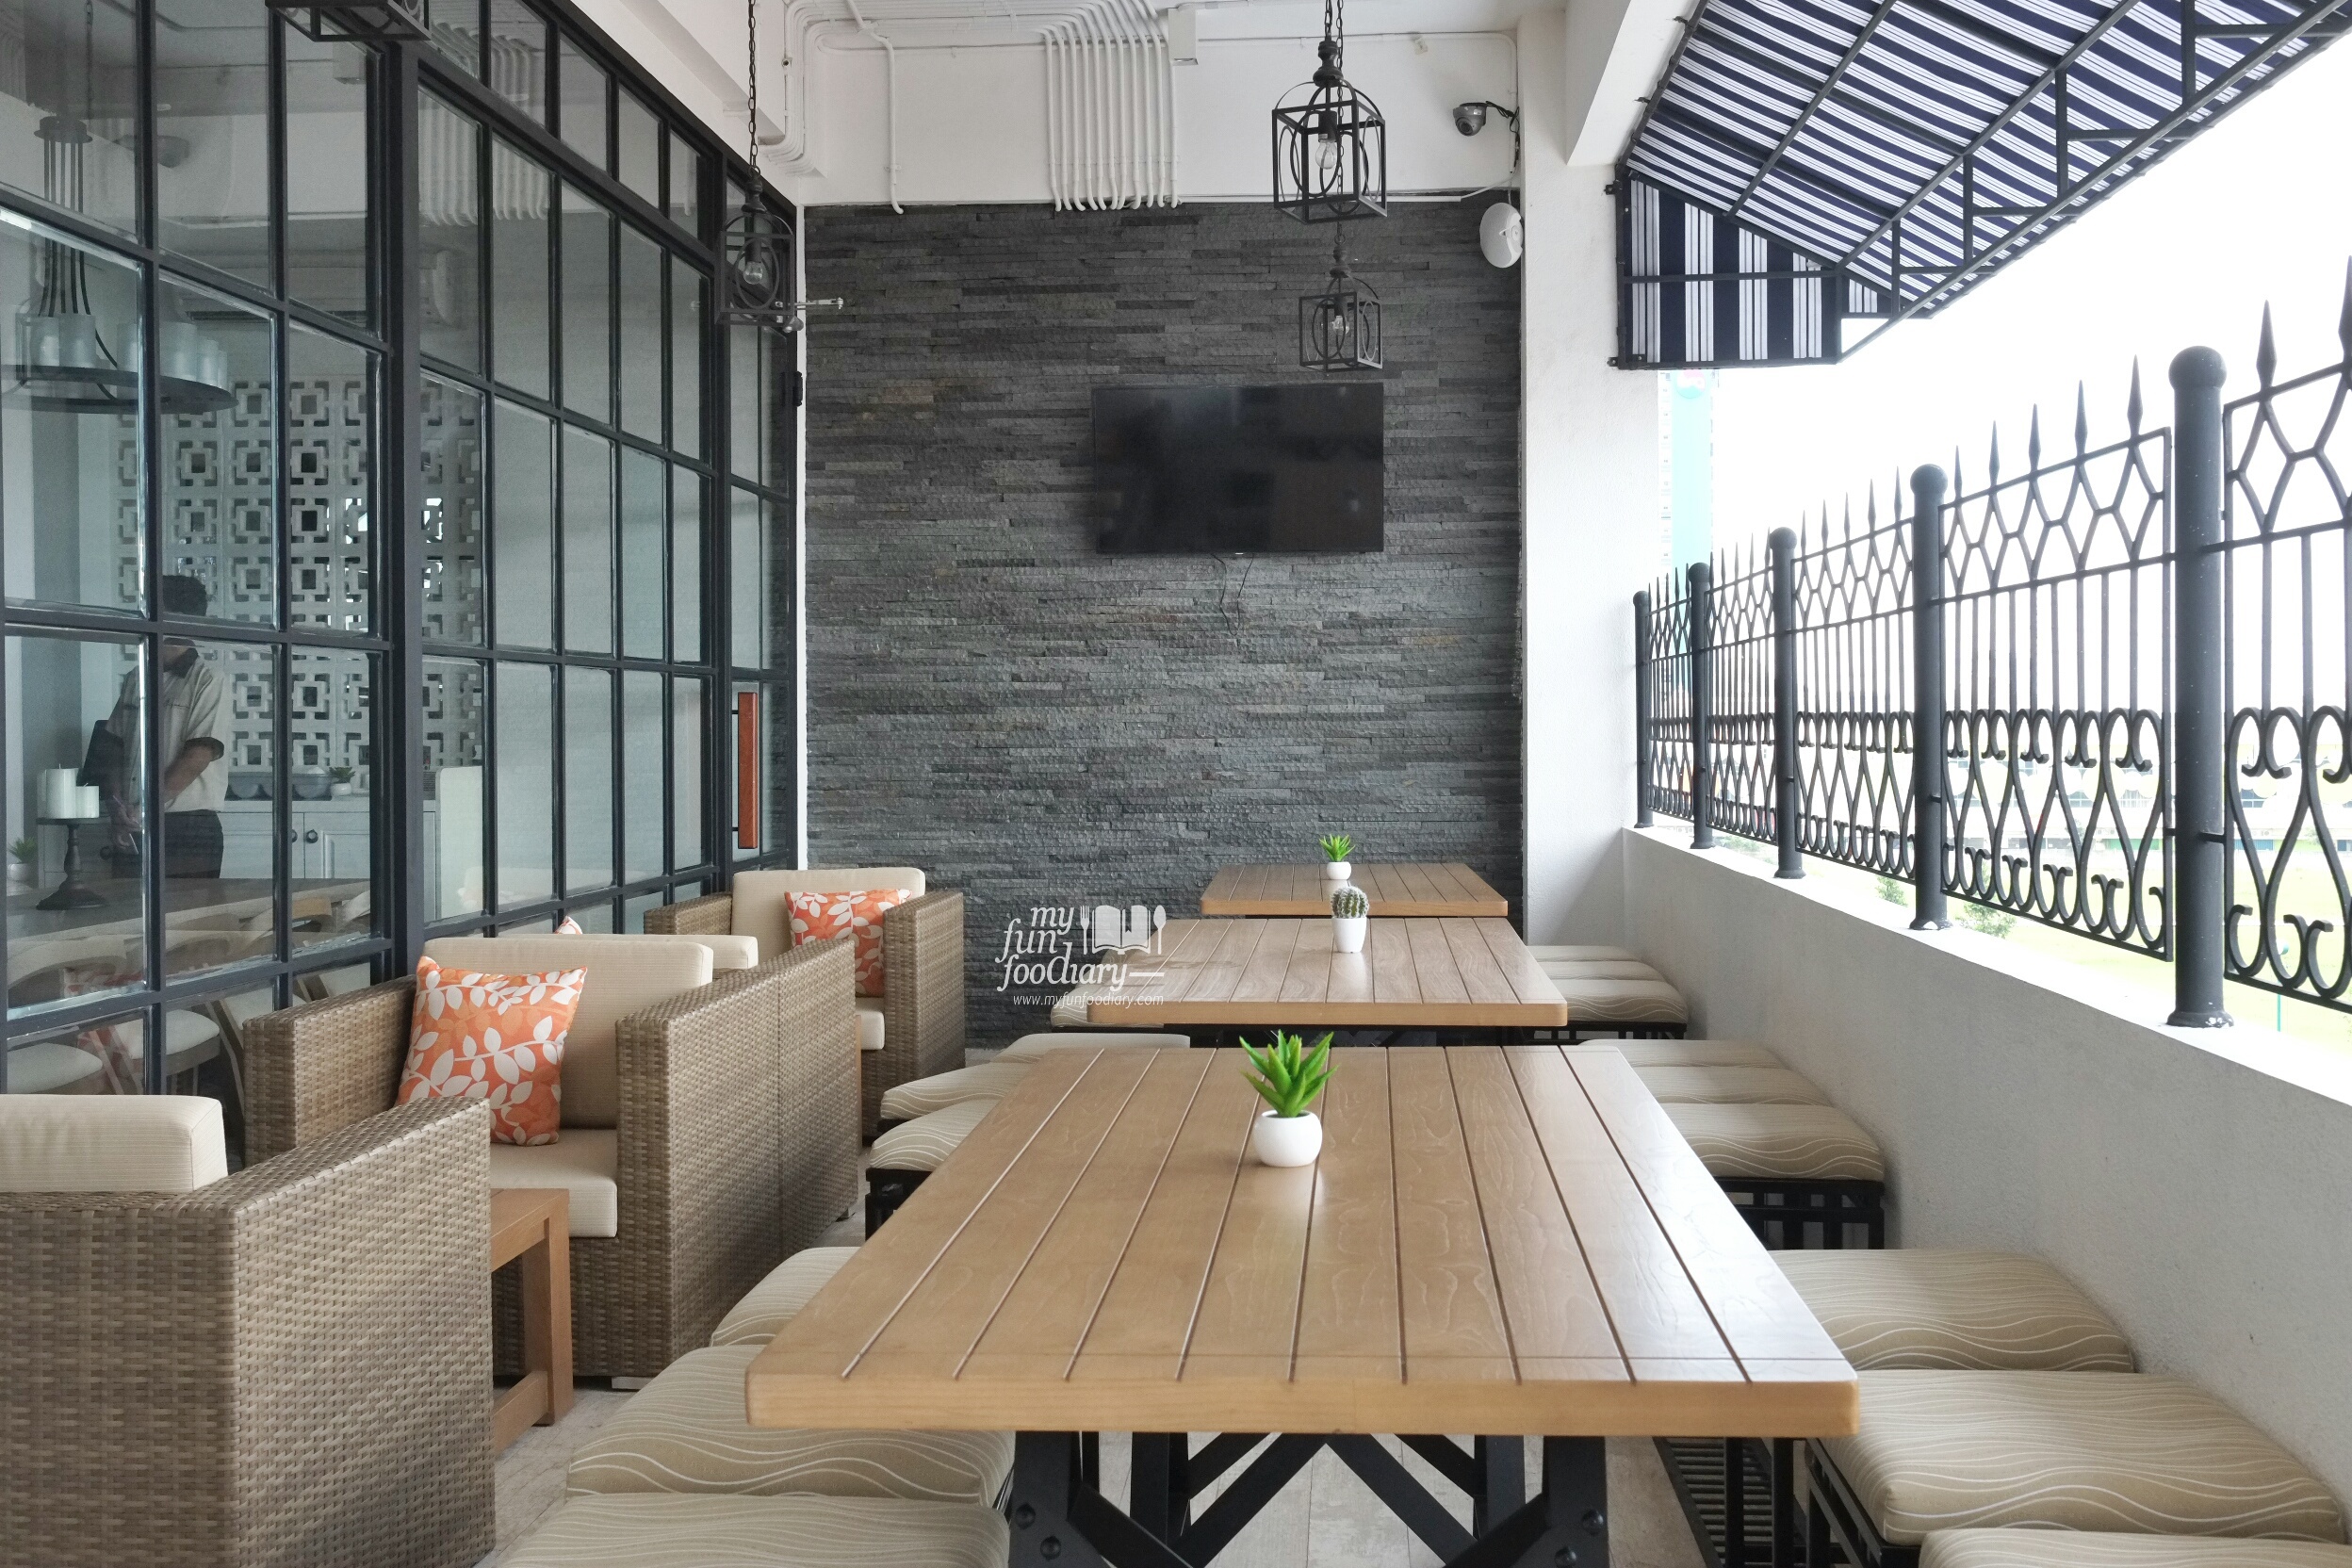 Outdoor Area at Clique Kitchen and Bar by Myfunfoodiary